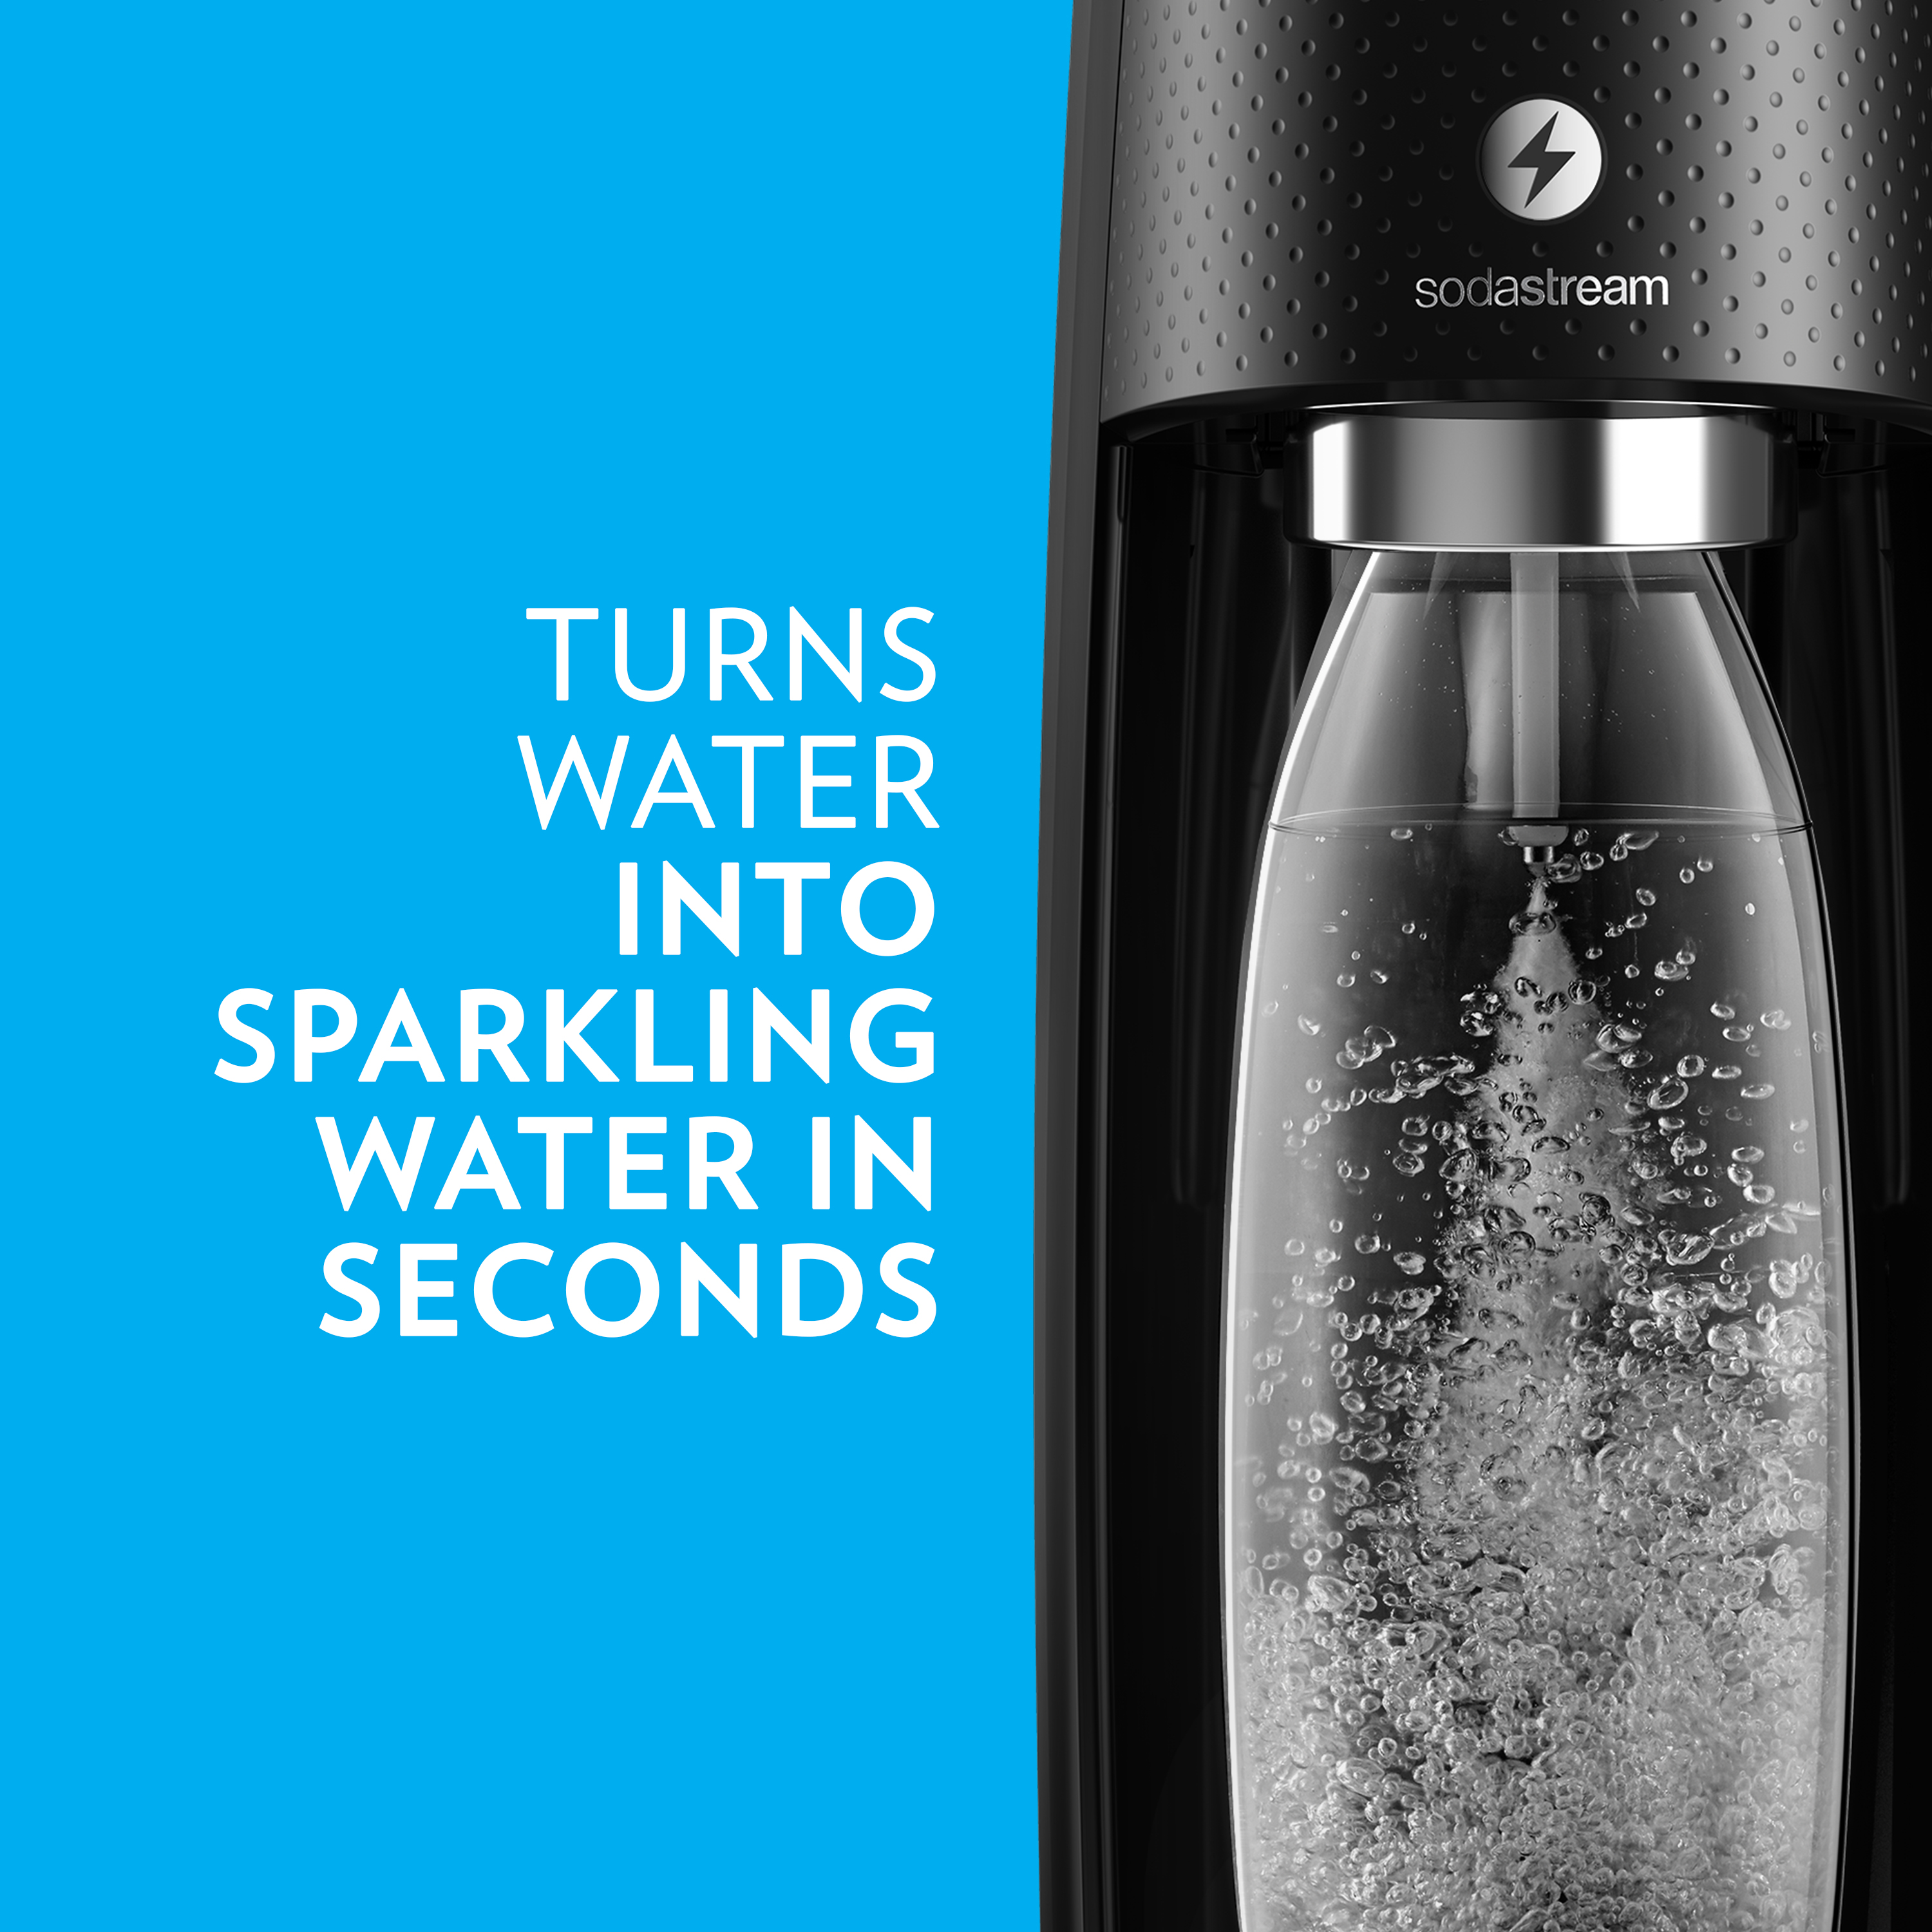 SodaStream One Touch Electric Sparkling Water Maker Kit, Black - image 4 of 10